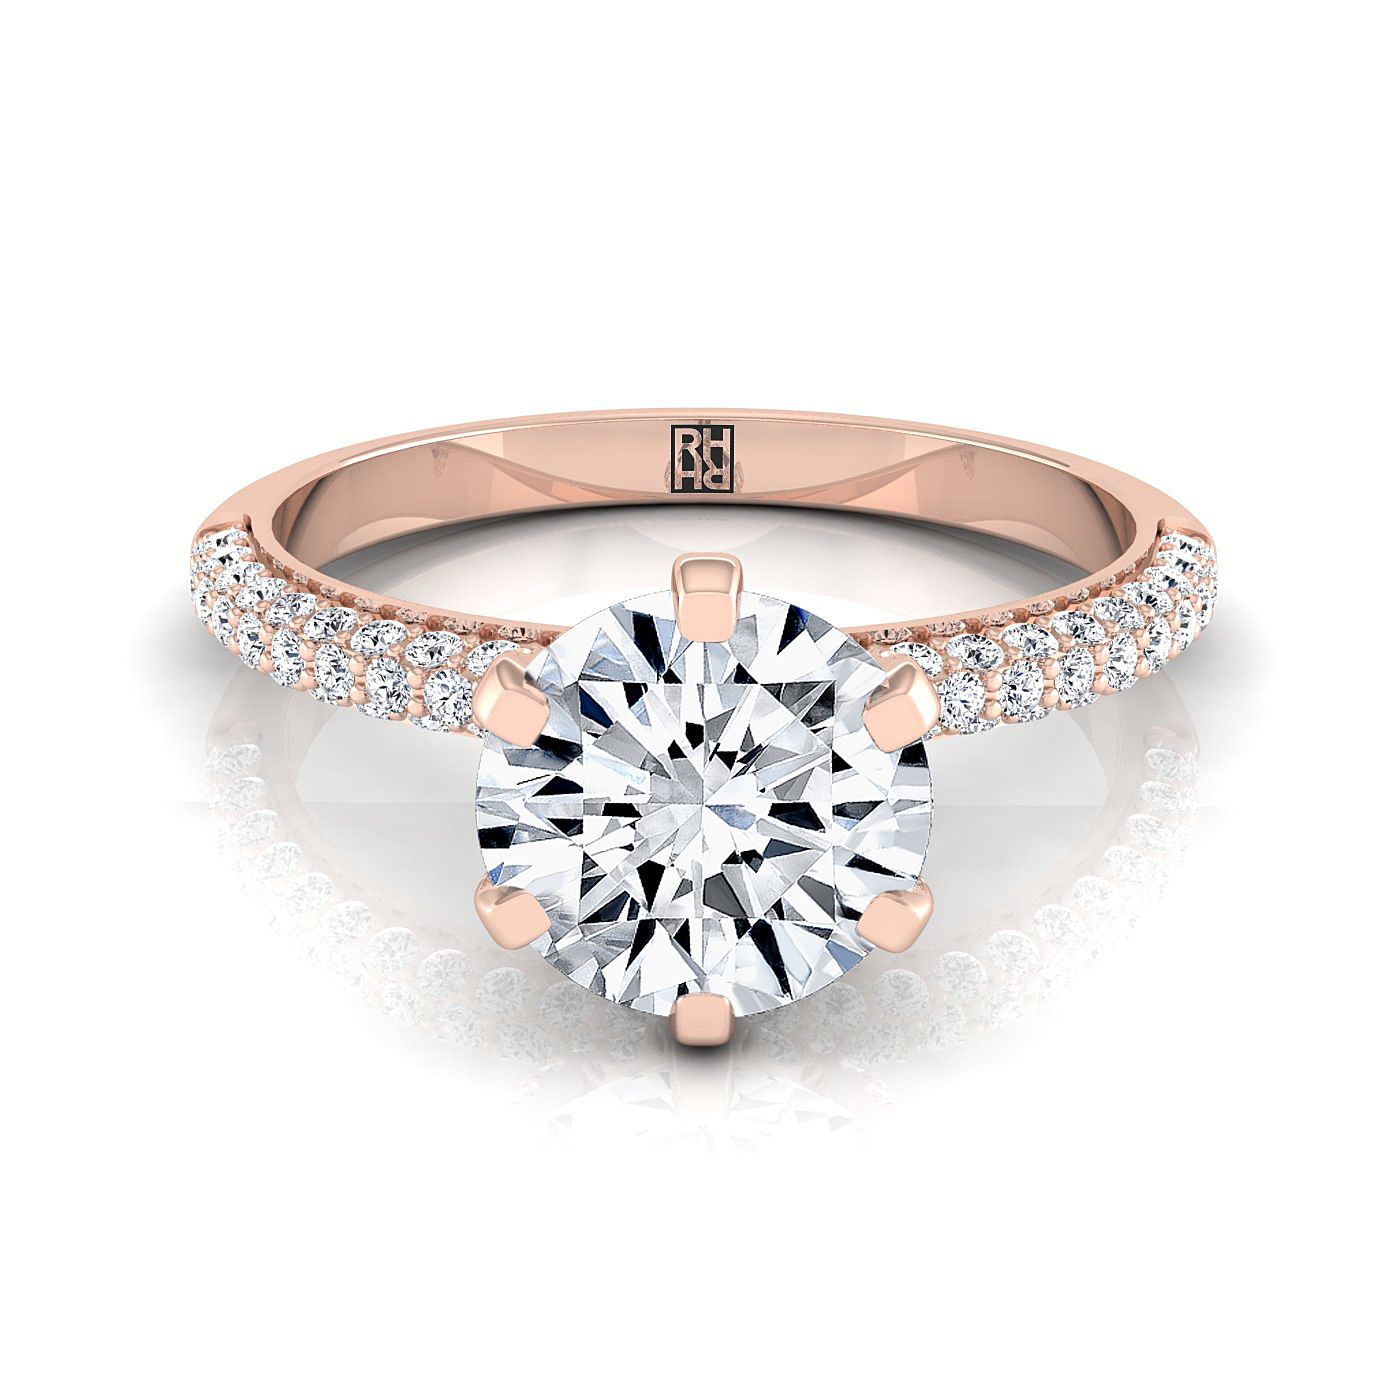 14K Rose Gold Round Brilliant Diamond Three Row French Pave Simple Engagement Ring -1/3ctw